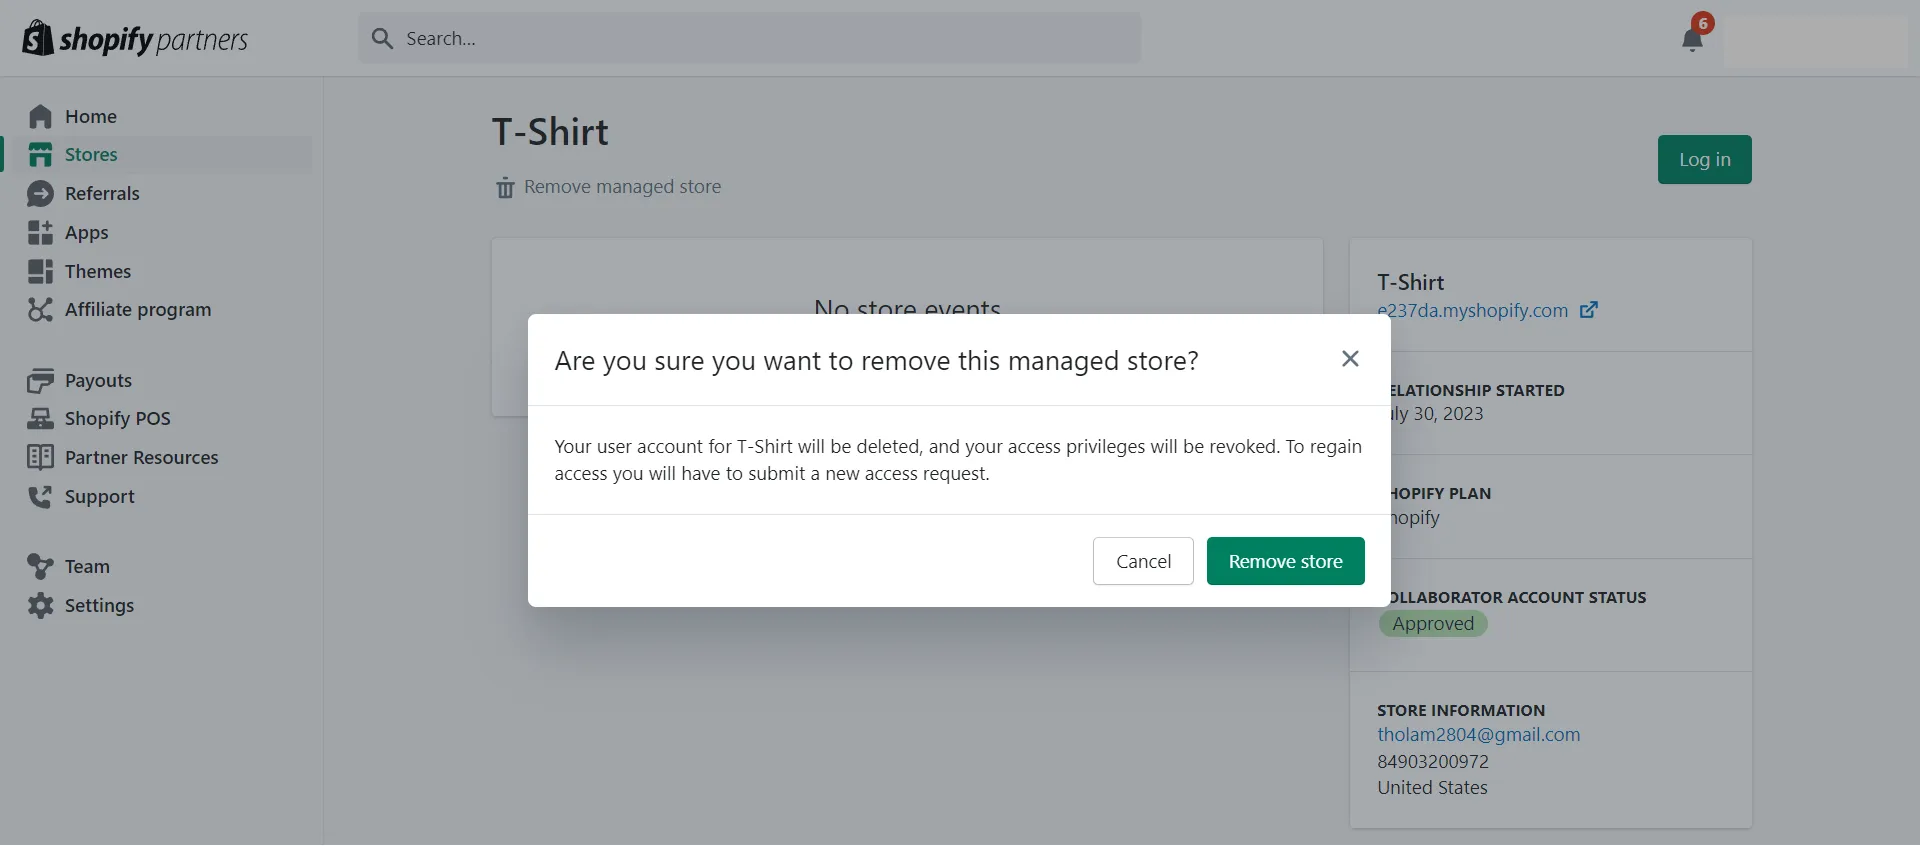 How to remove a collaborator on Shopify Partners